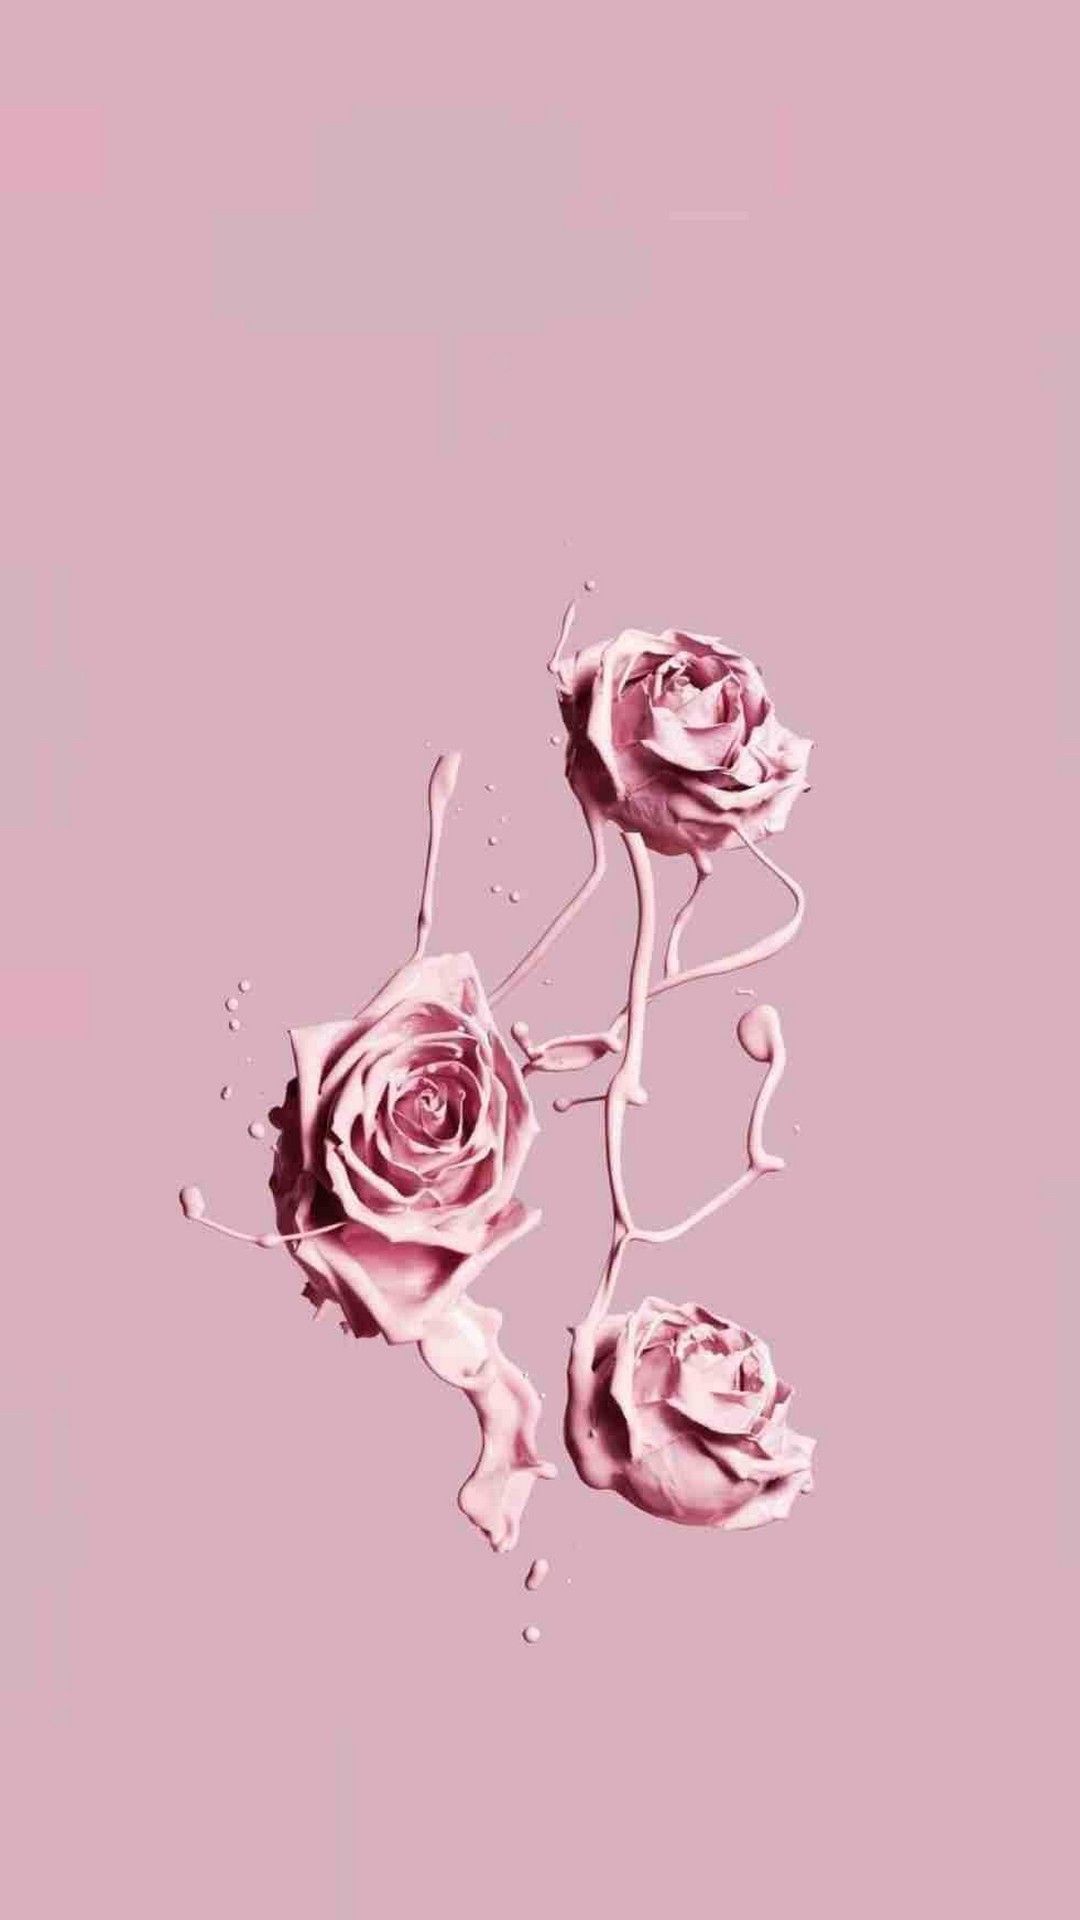 IPhone wallpaper of a rose with water droplets - Garden, rose gold, roses